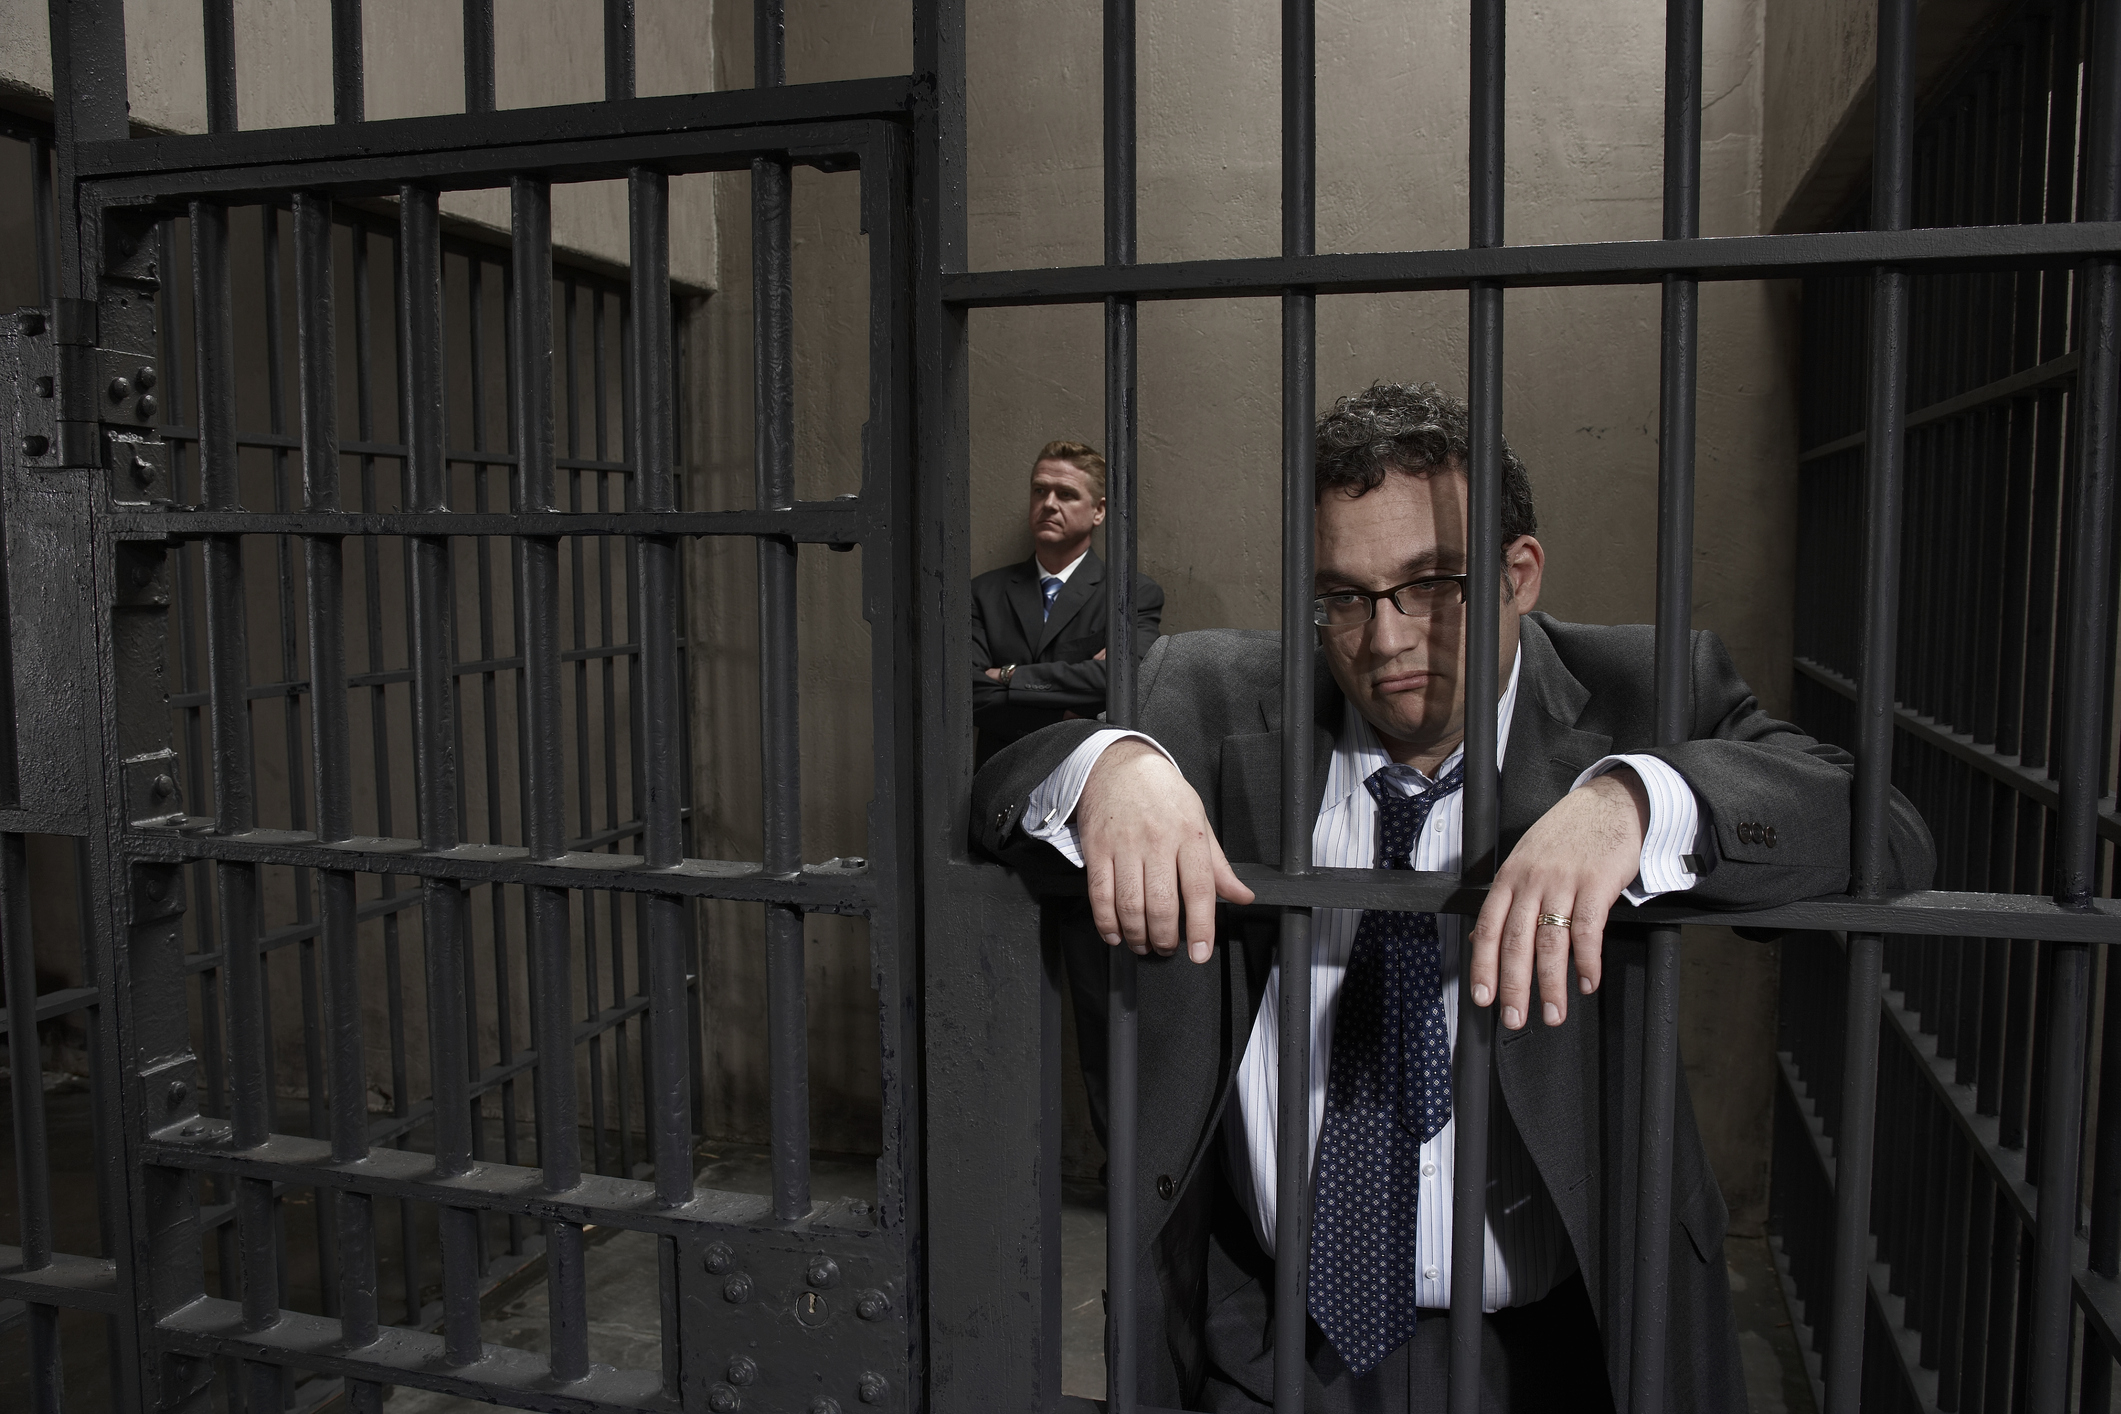 Two men in suits behind bars